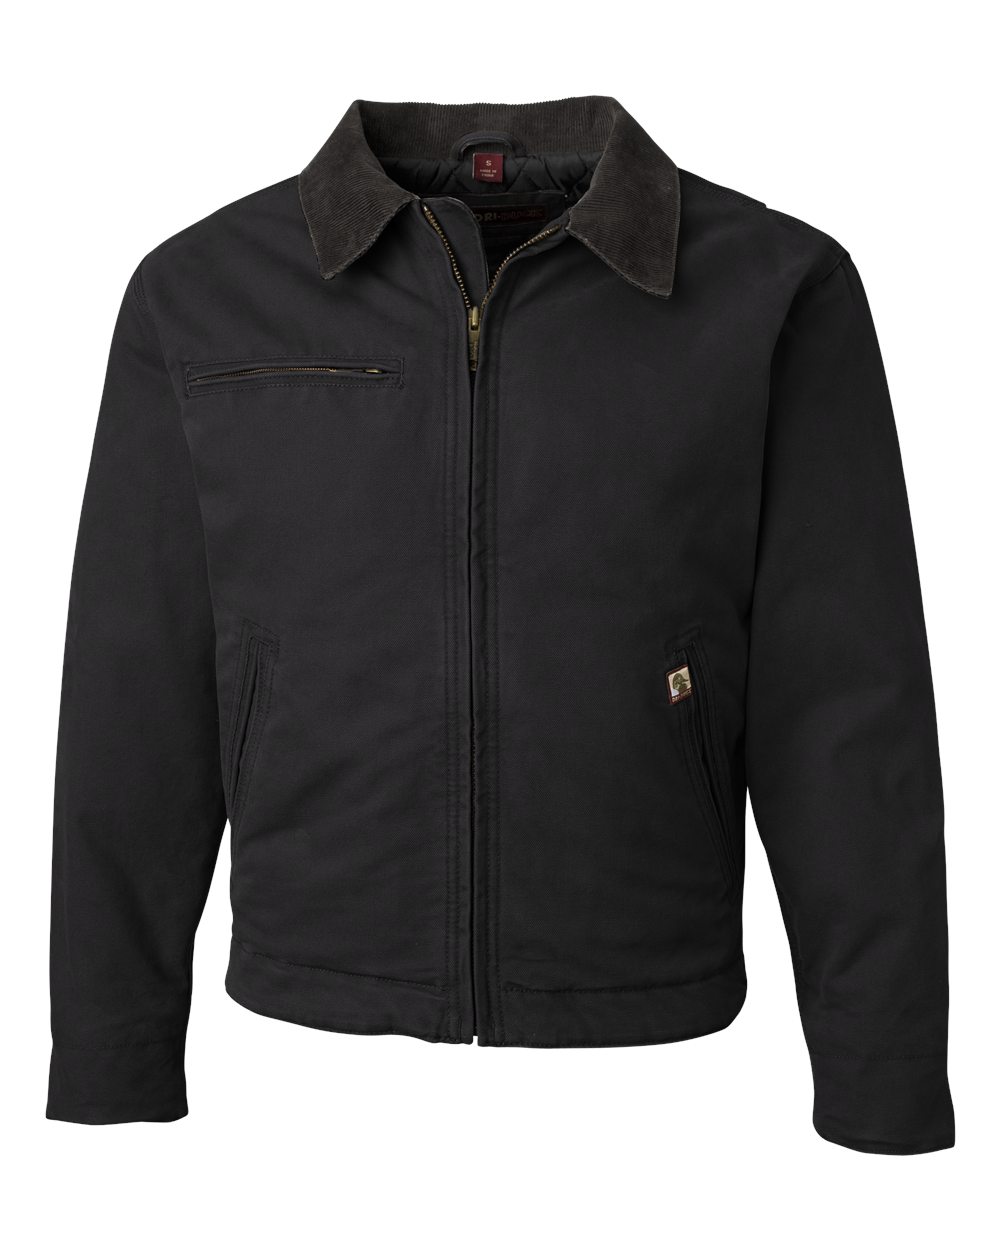 Outlaw Boulder Cloth™ Jacket with Corduroy Collar - 5087-DKR